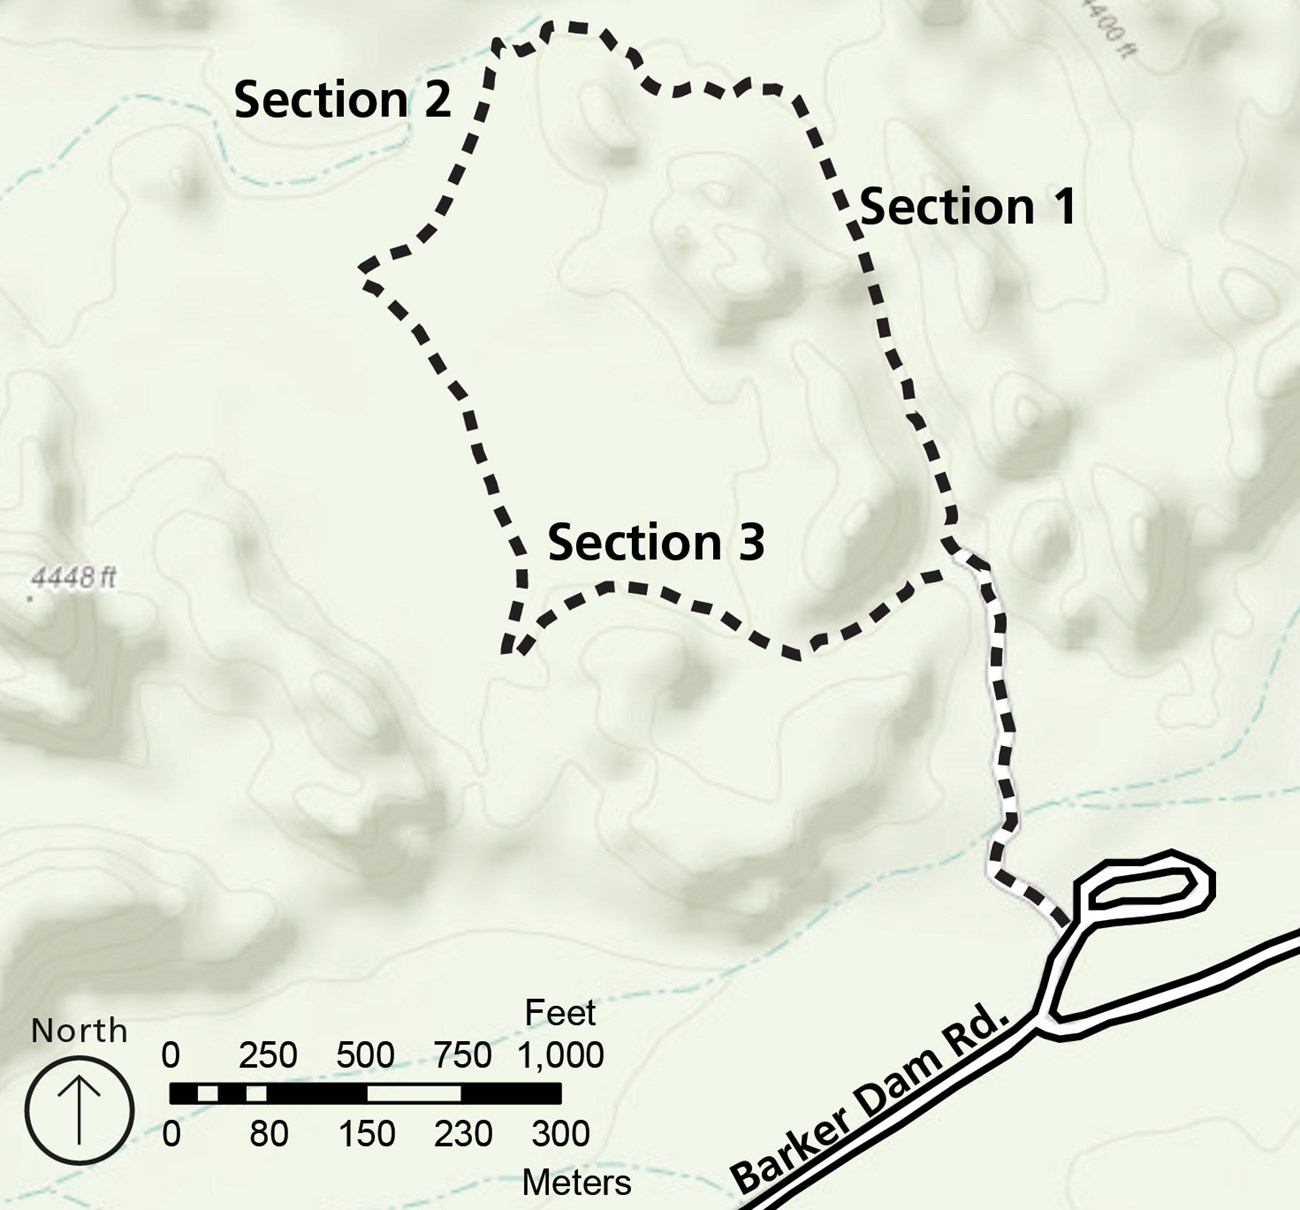 Color image of a map of the Barker Dam area. The trail leaves from a parking lot in the lower right, and makes a loop headed north, then west, south, and back east to meet partway up the first part of the trail. The trail looks like it makes a 9 in shape.